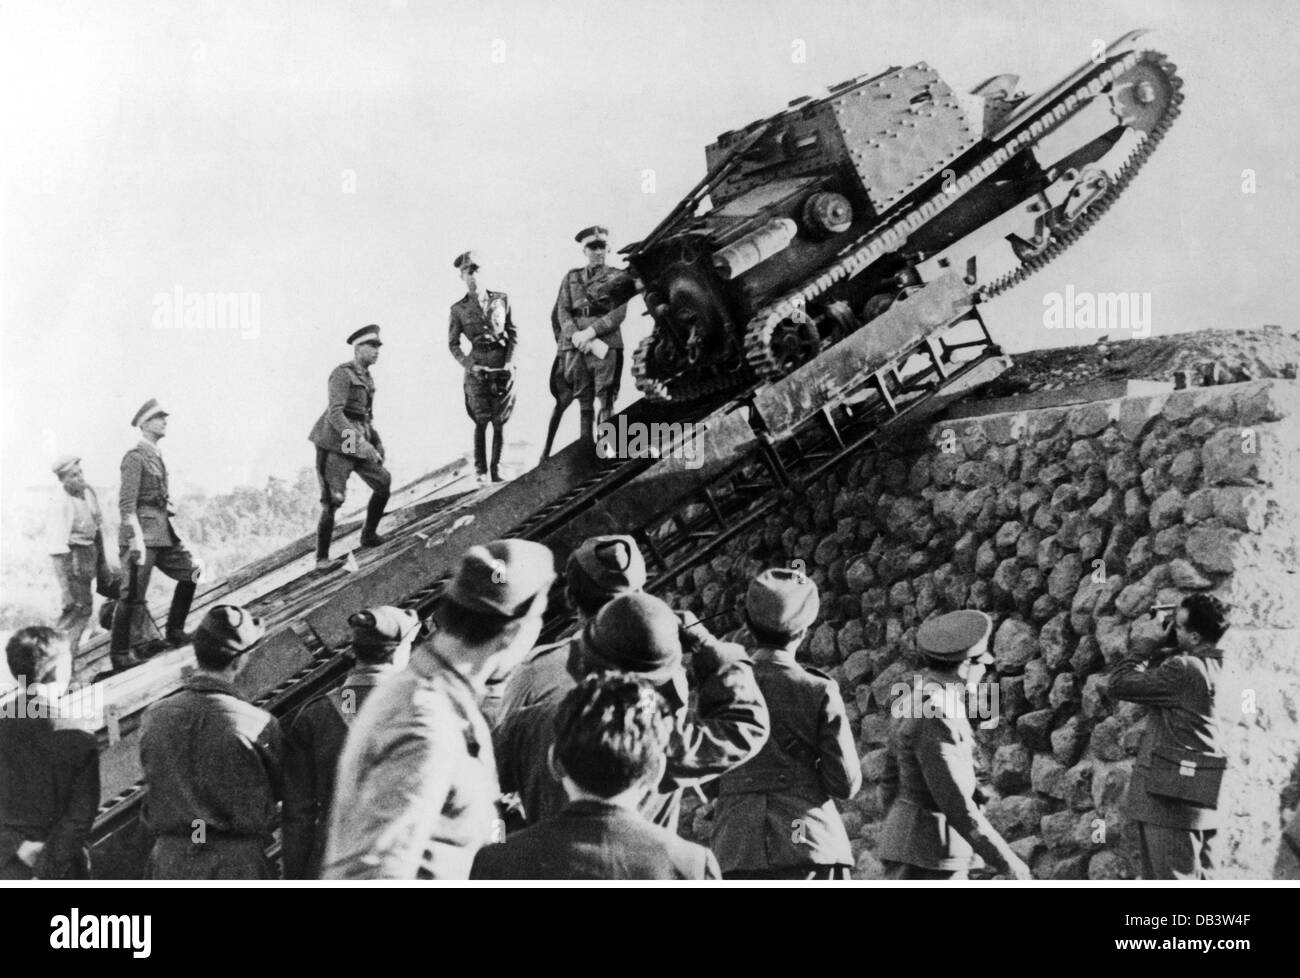 military, Italy, army, tank race in Italy, 1936, Additional-Rights-Clearences-Not Available Stock Photo